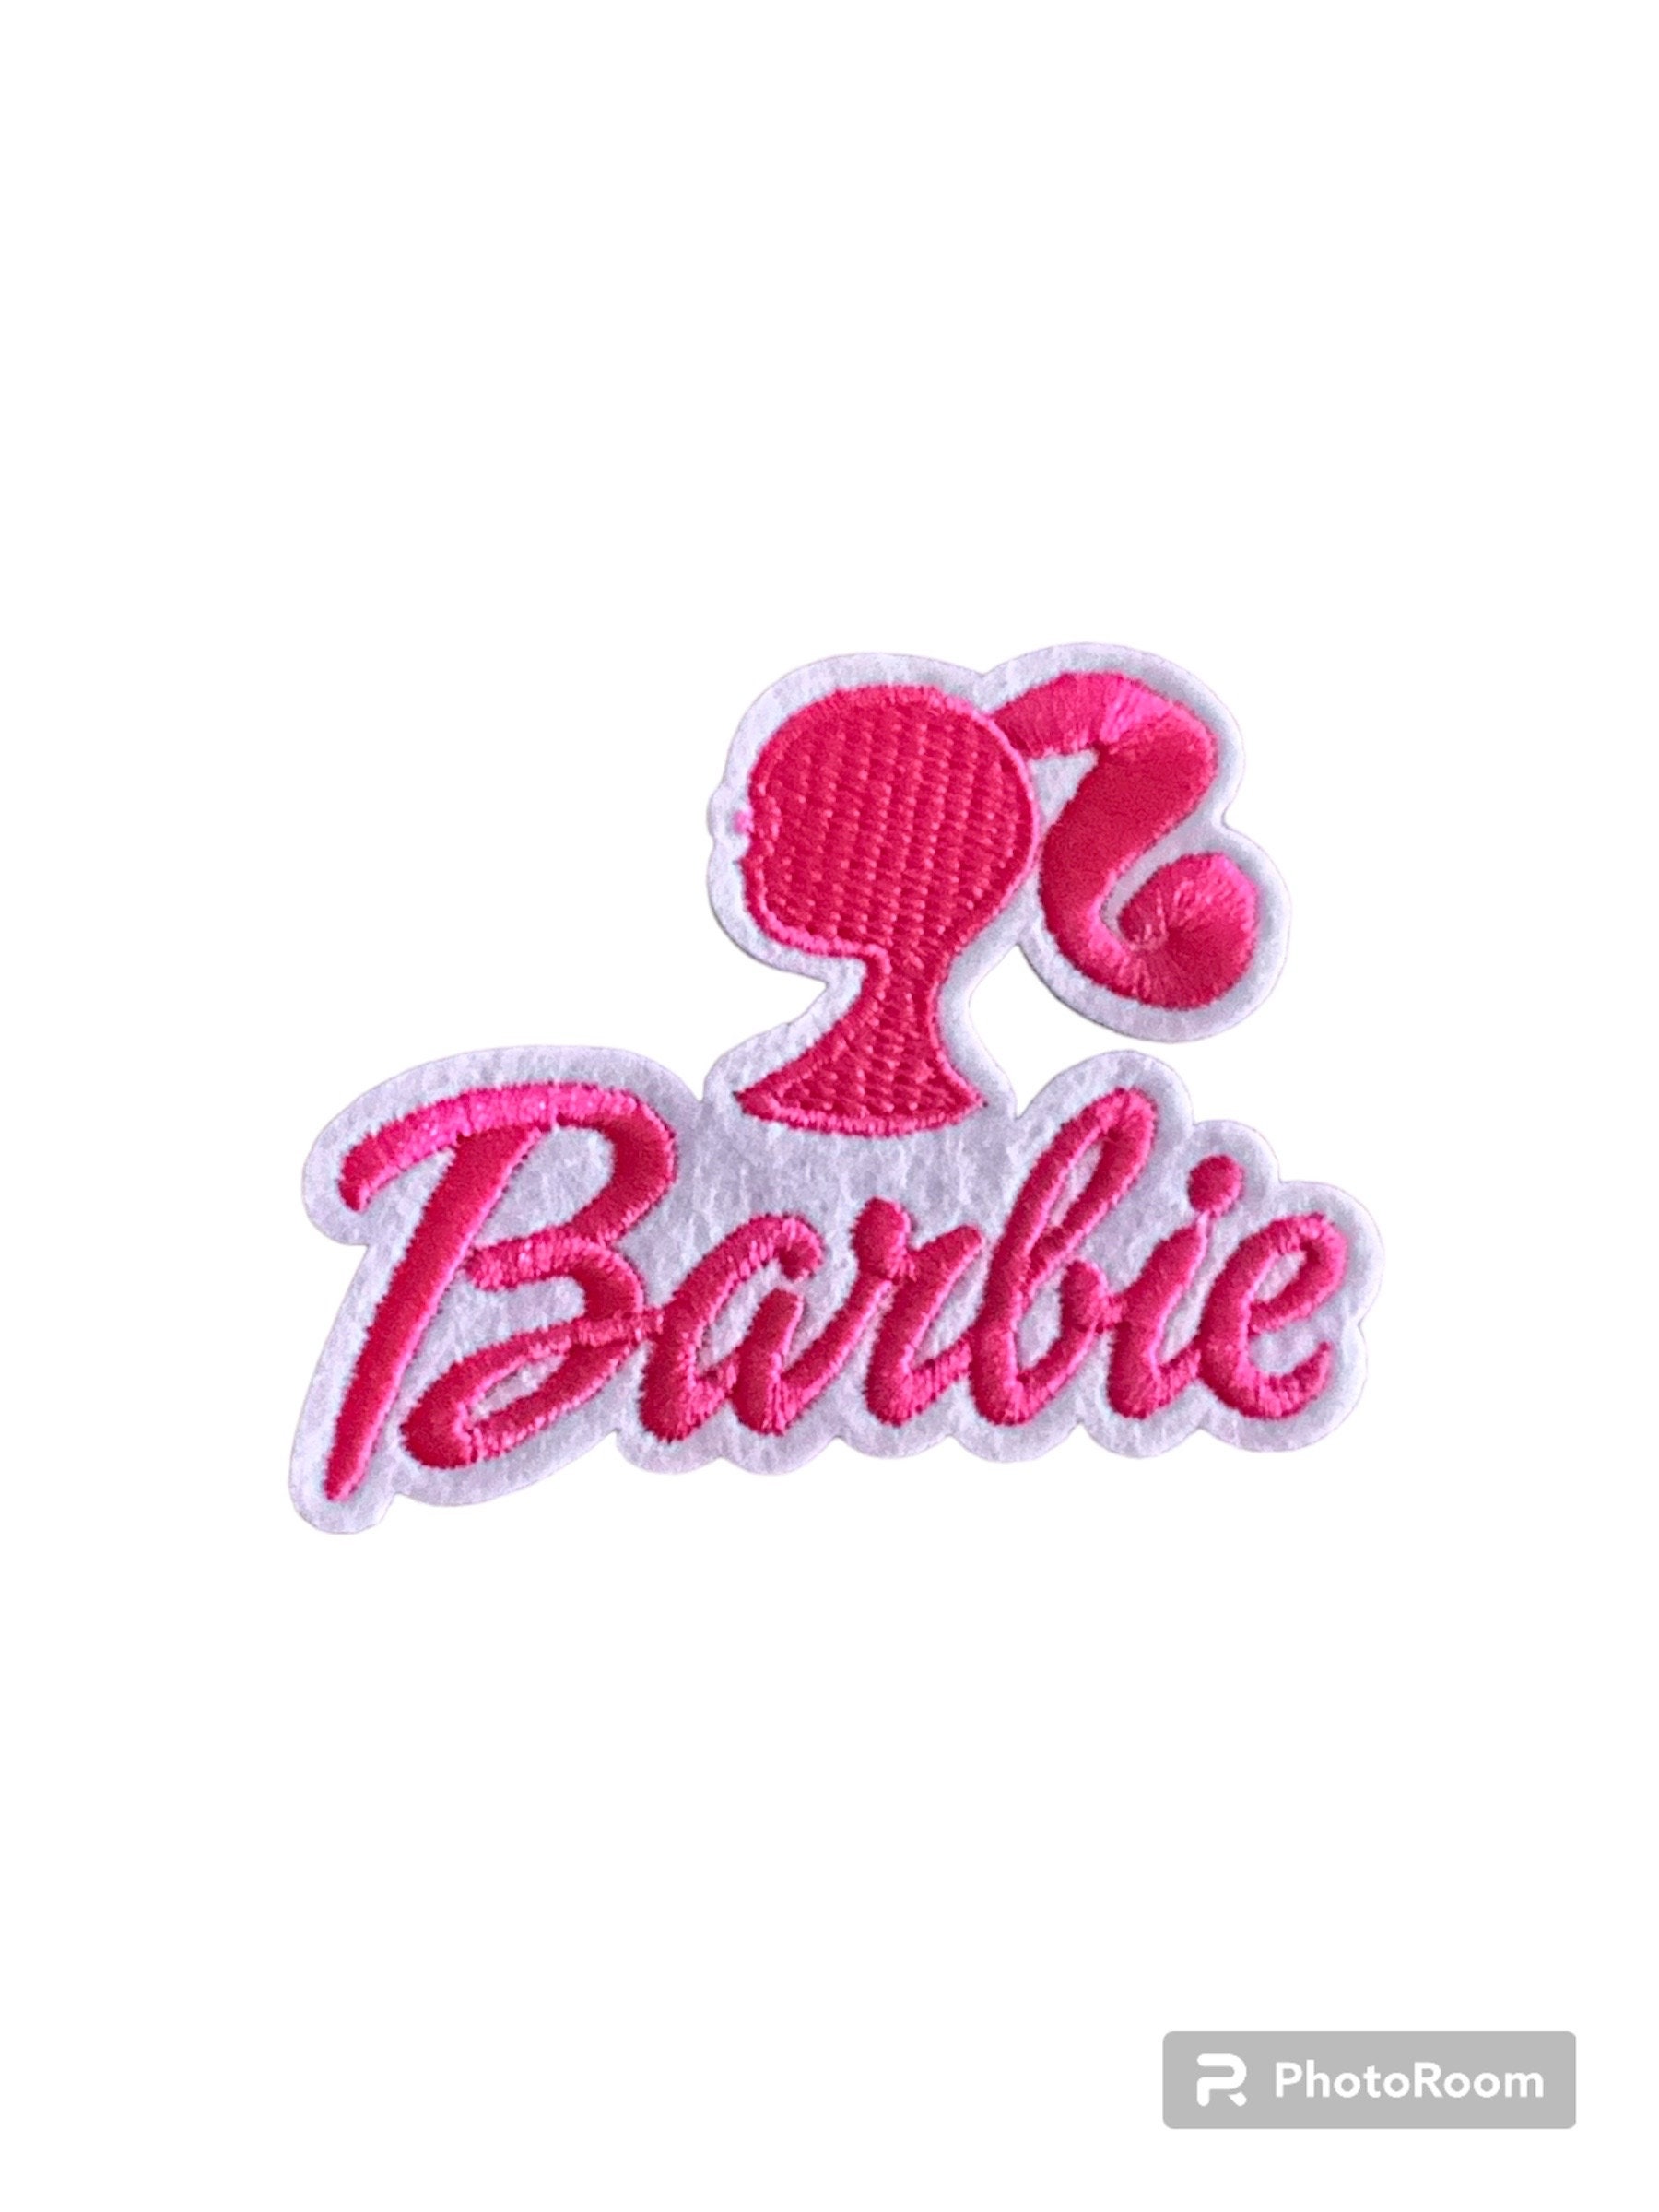 Fabric Iron on Barbie Style Silhouette Applique 